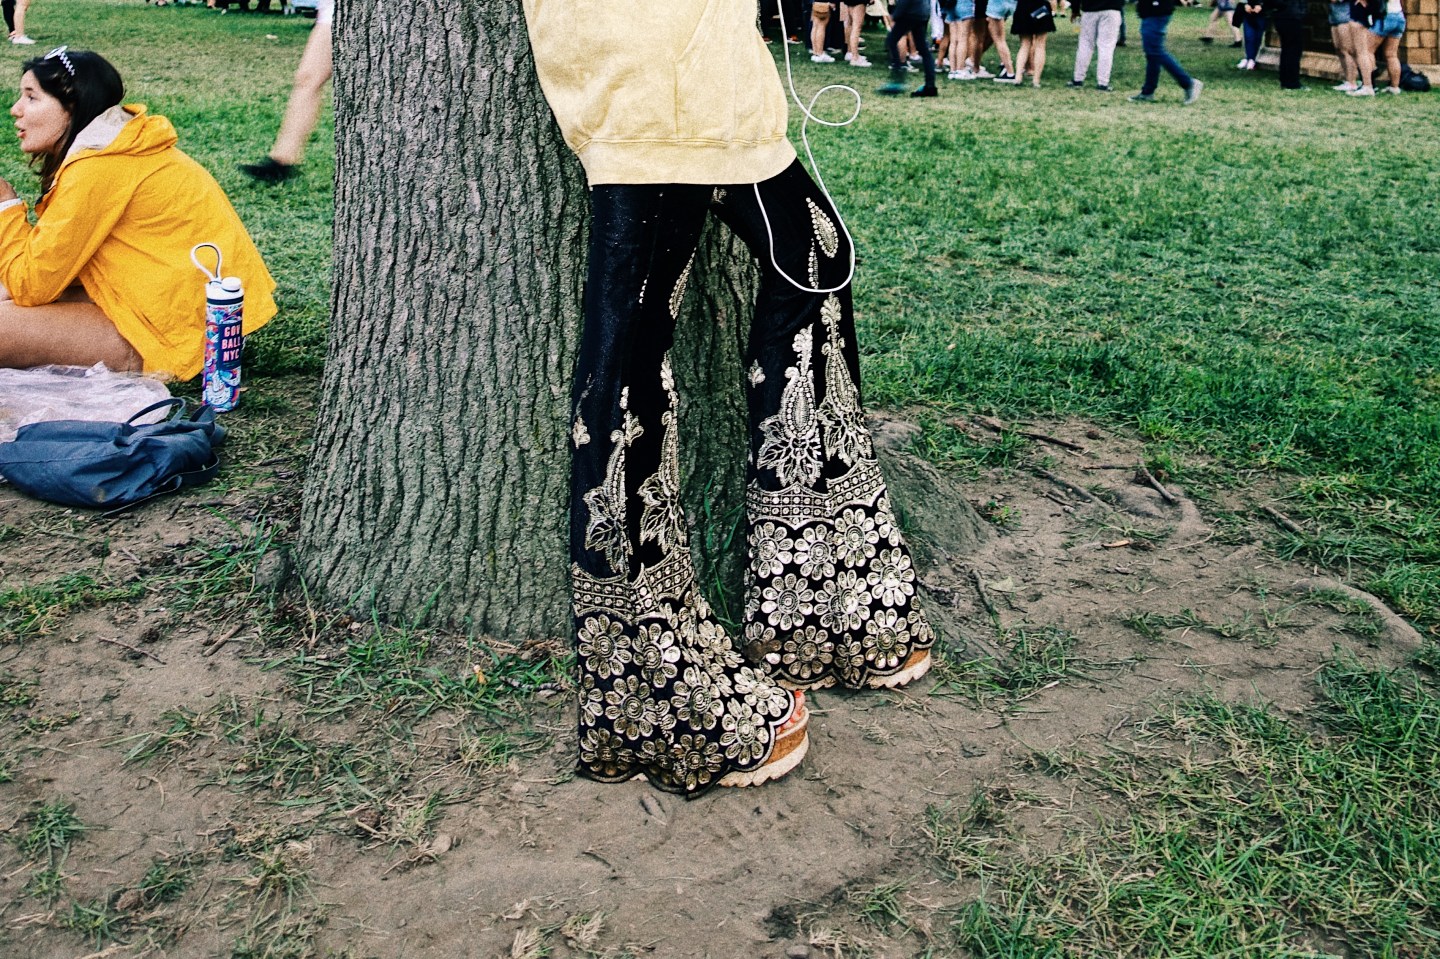 This year’s Governors Ball style was low-key as can be